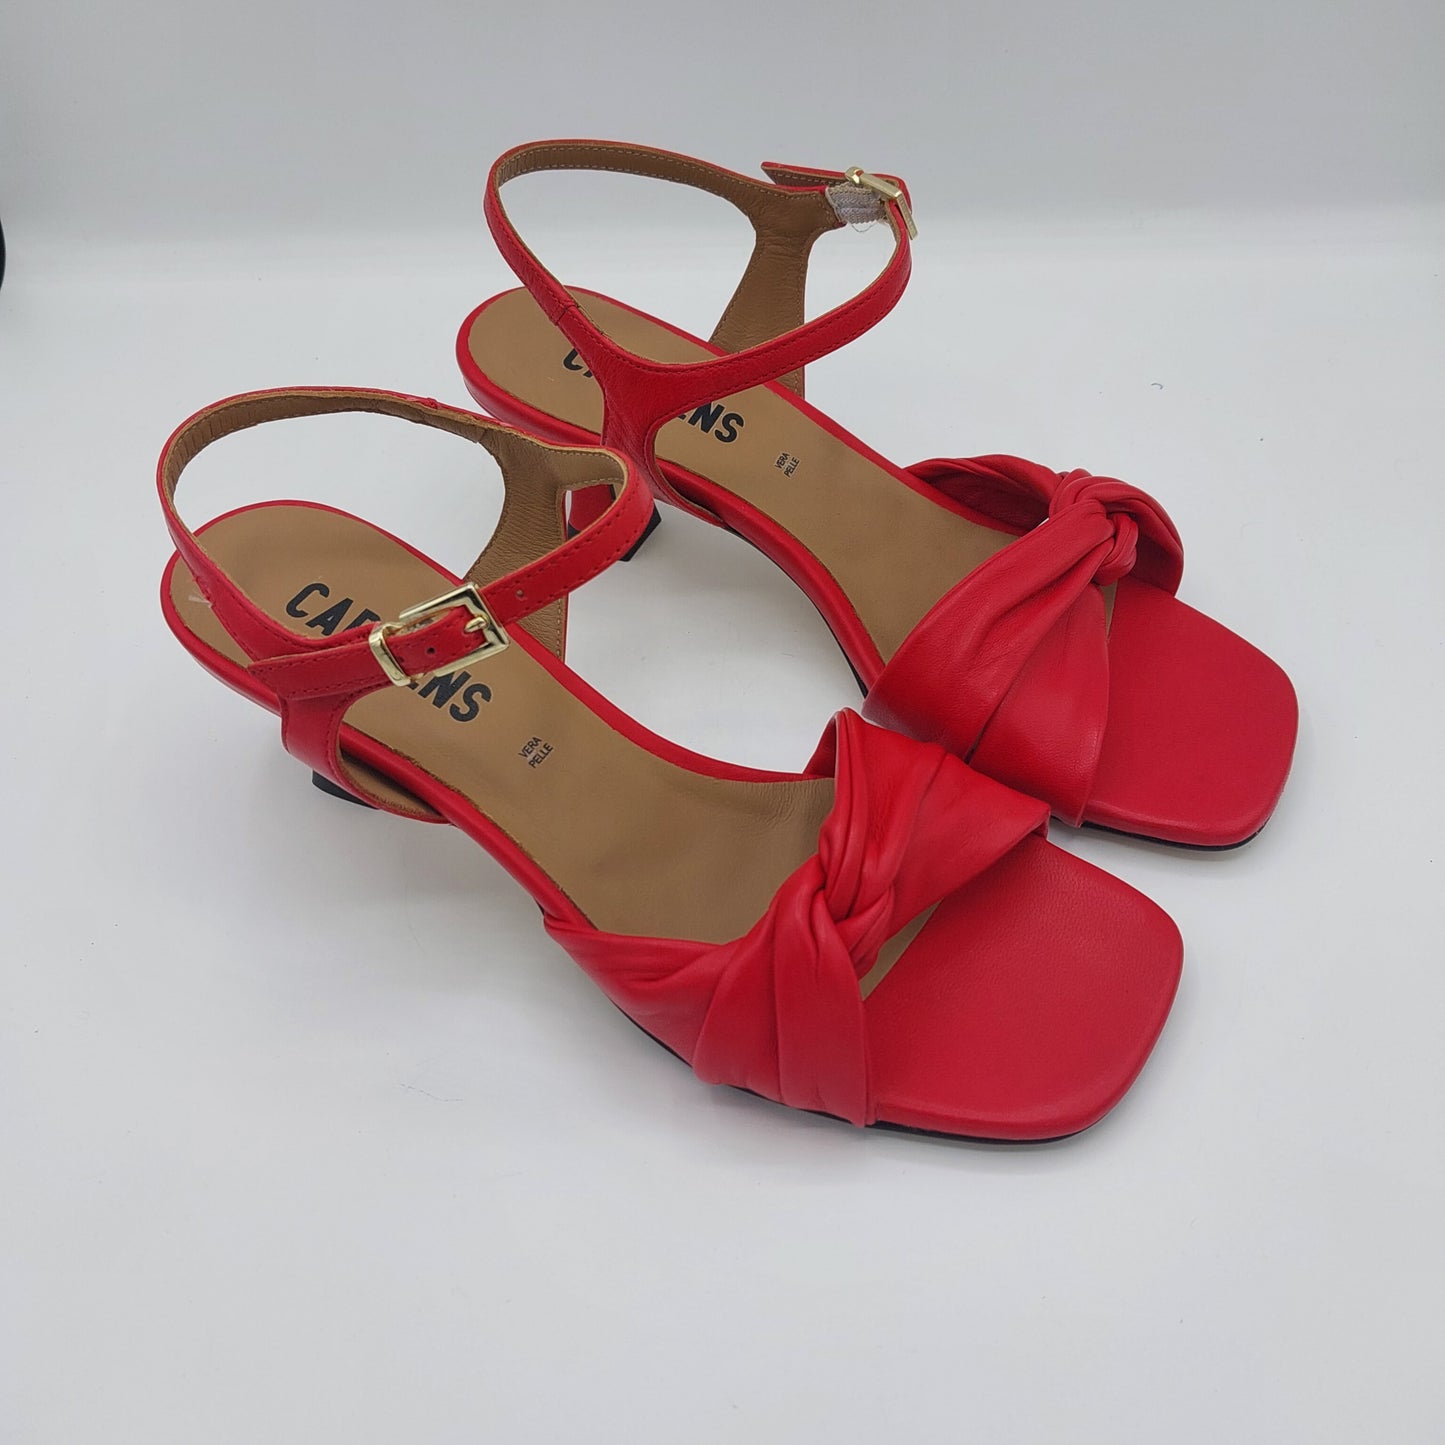 Carmens sandal in red leather